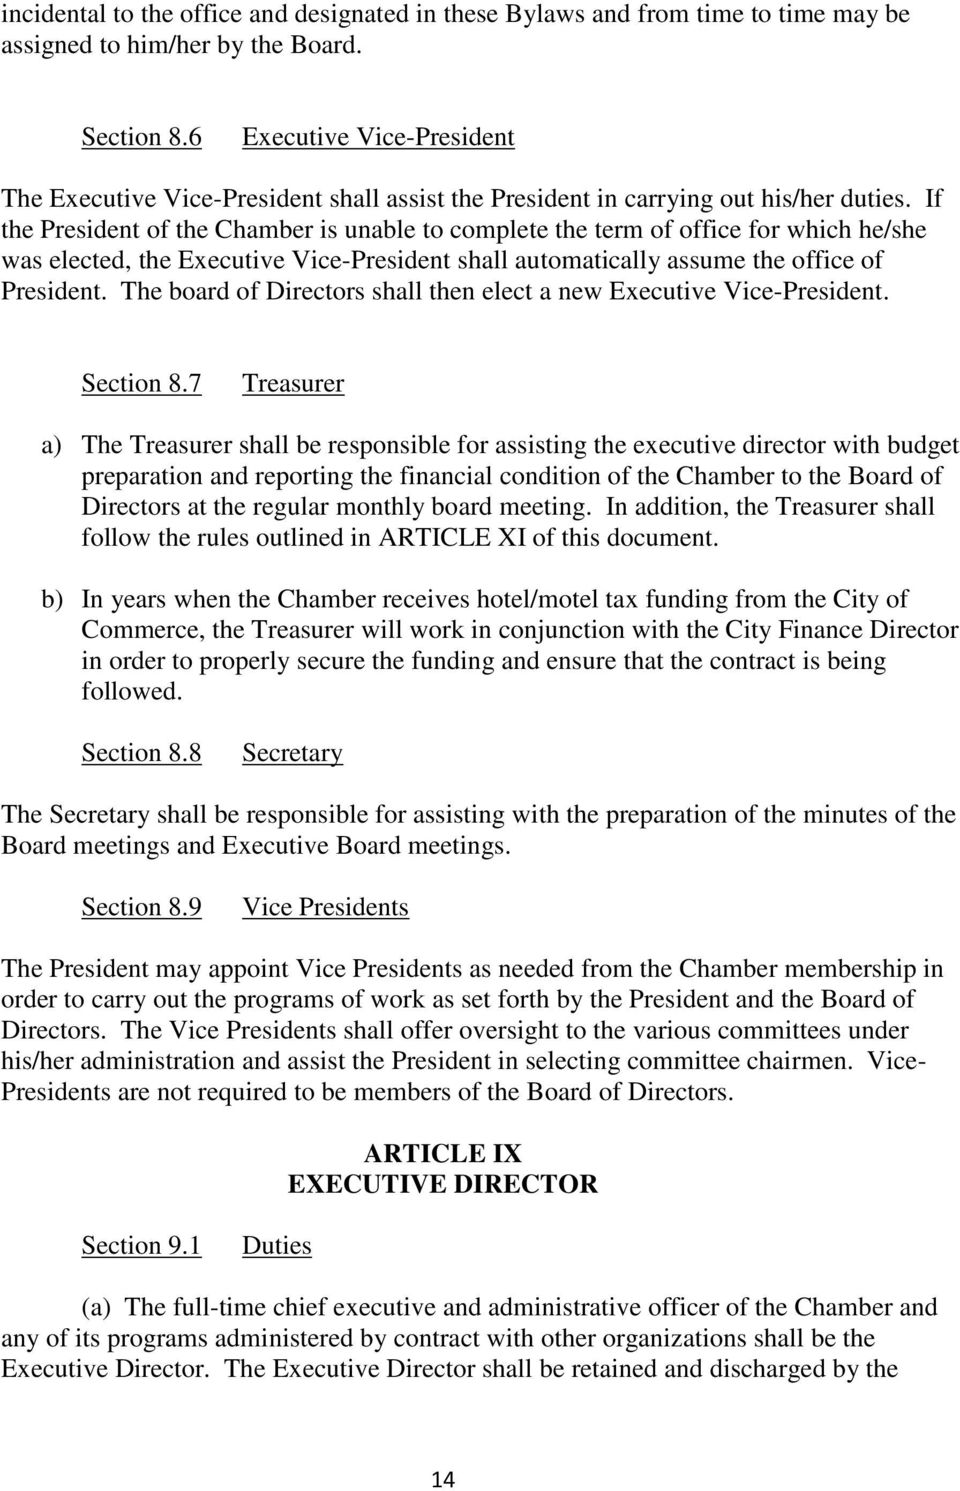 If the President of the Chamber is unable to complete the term of office for which he/she was elected, the Executive Vice-President shall automatically assume the office of President.